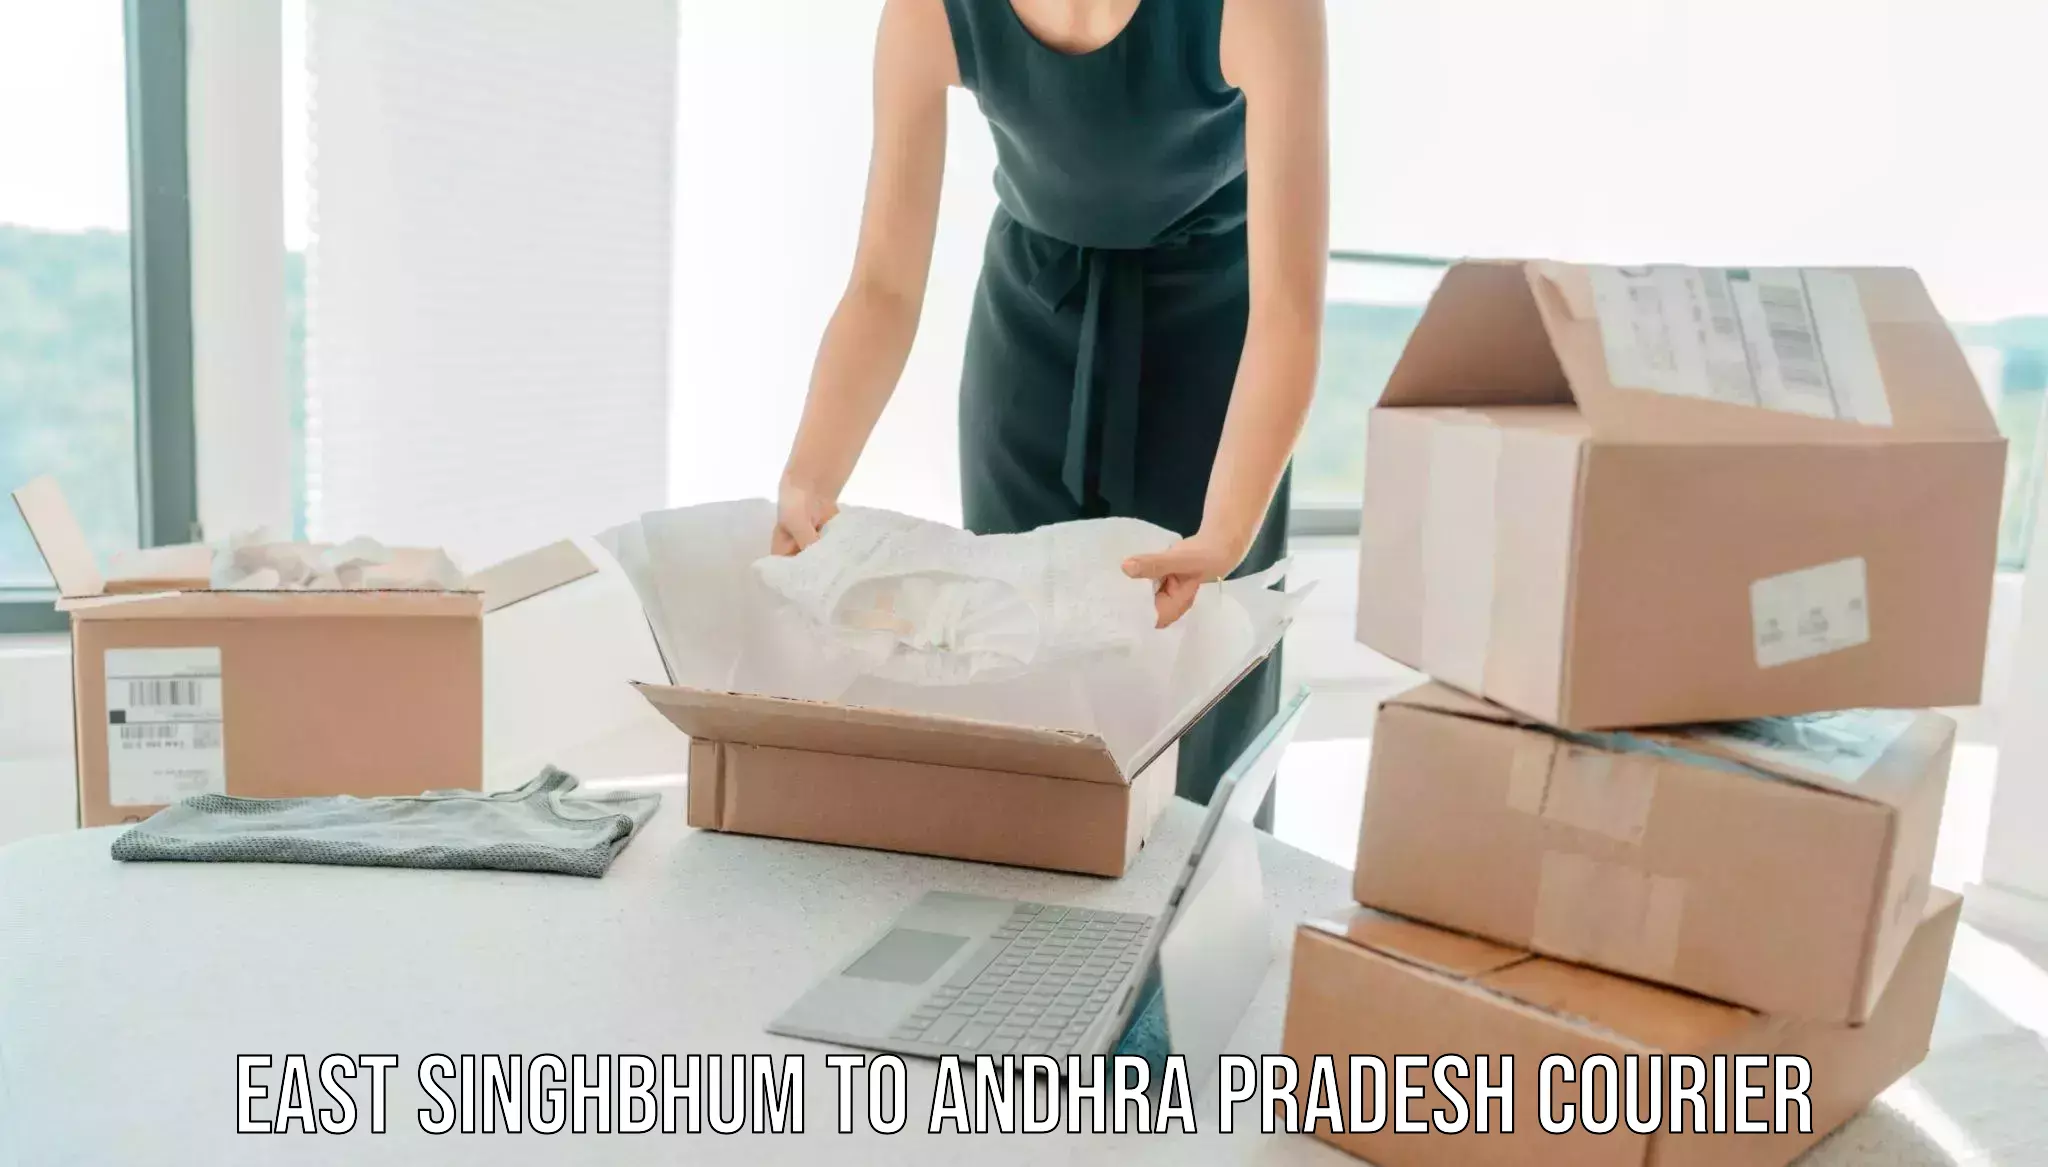 Skilled furniture movers in East Singhbhum to Bobbili